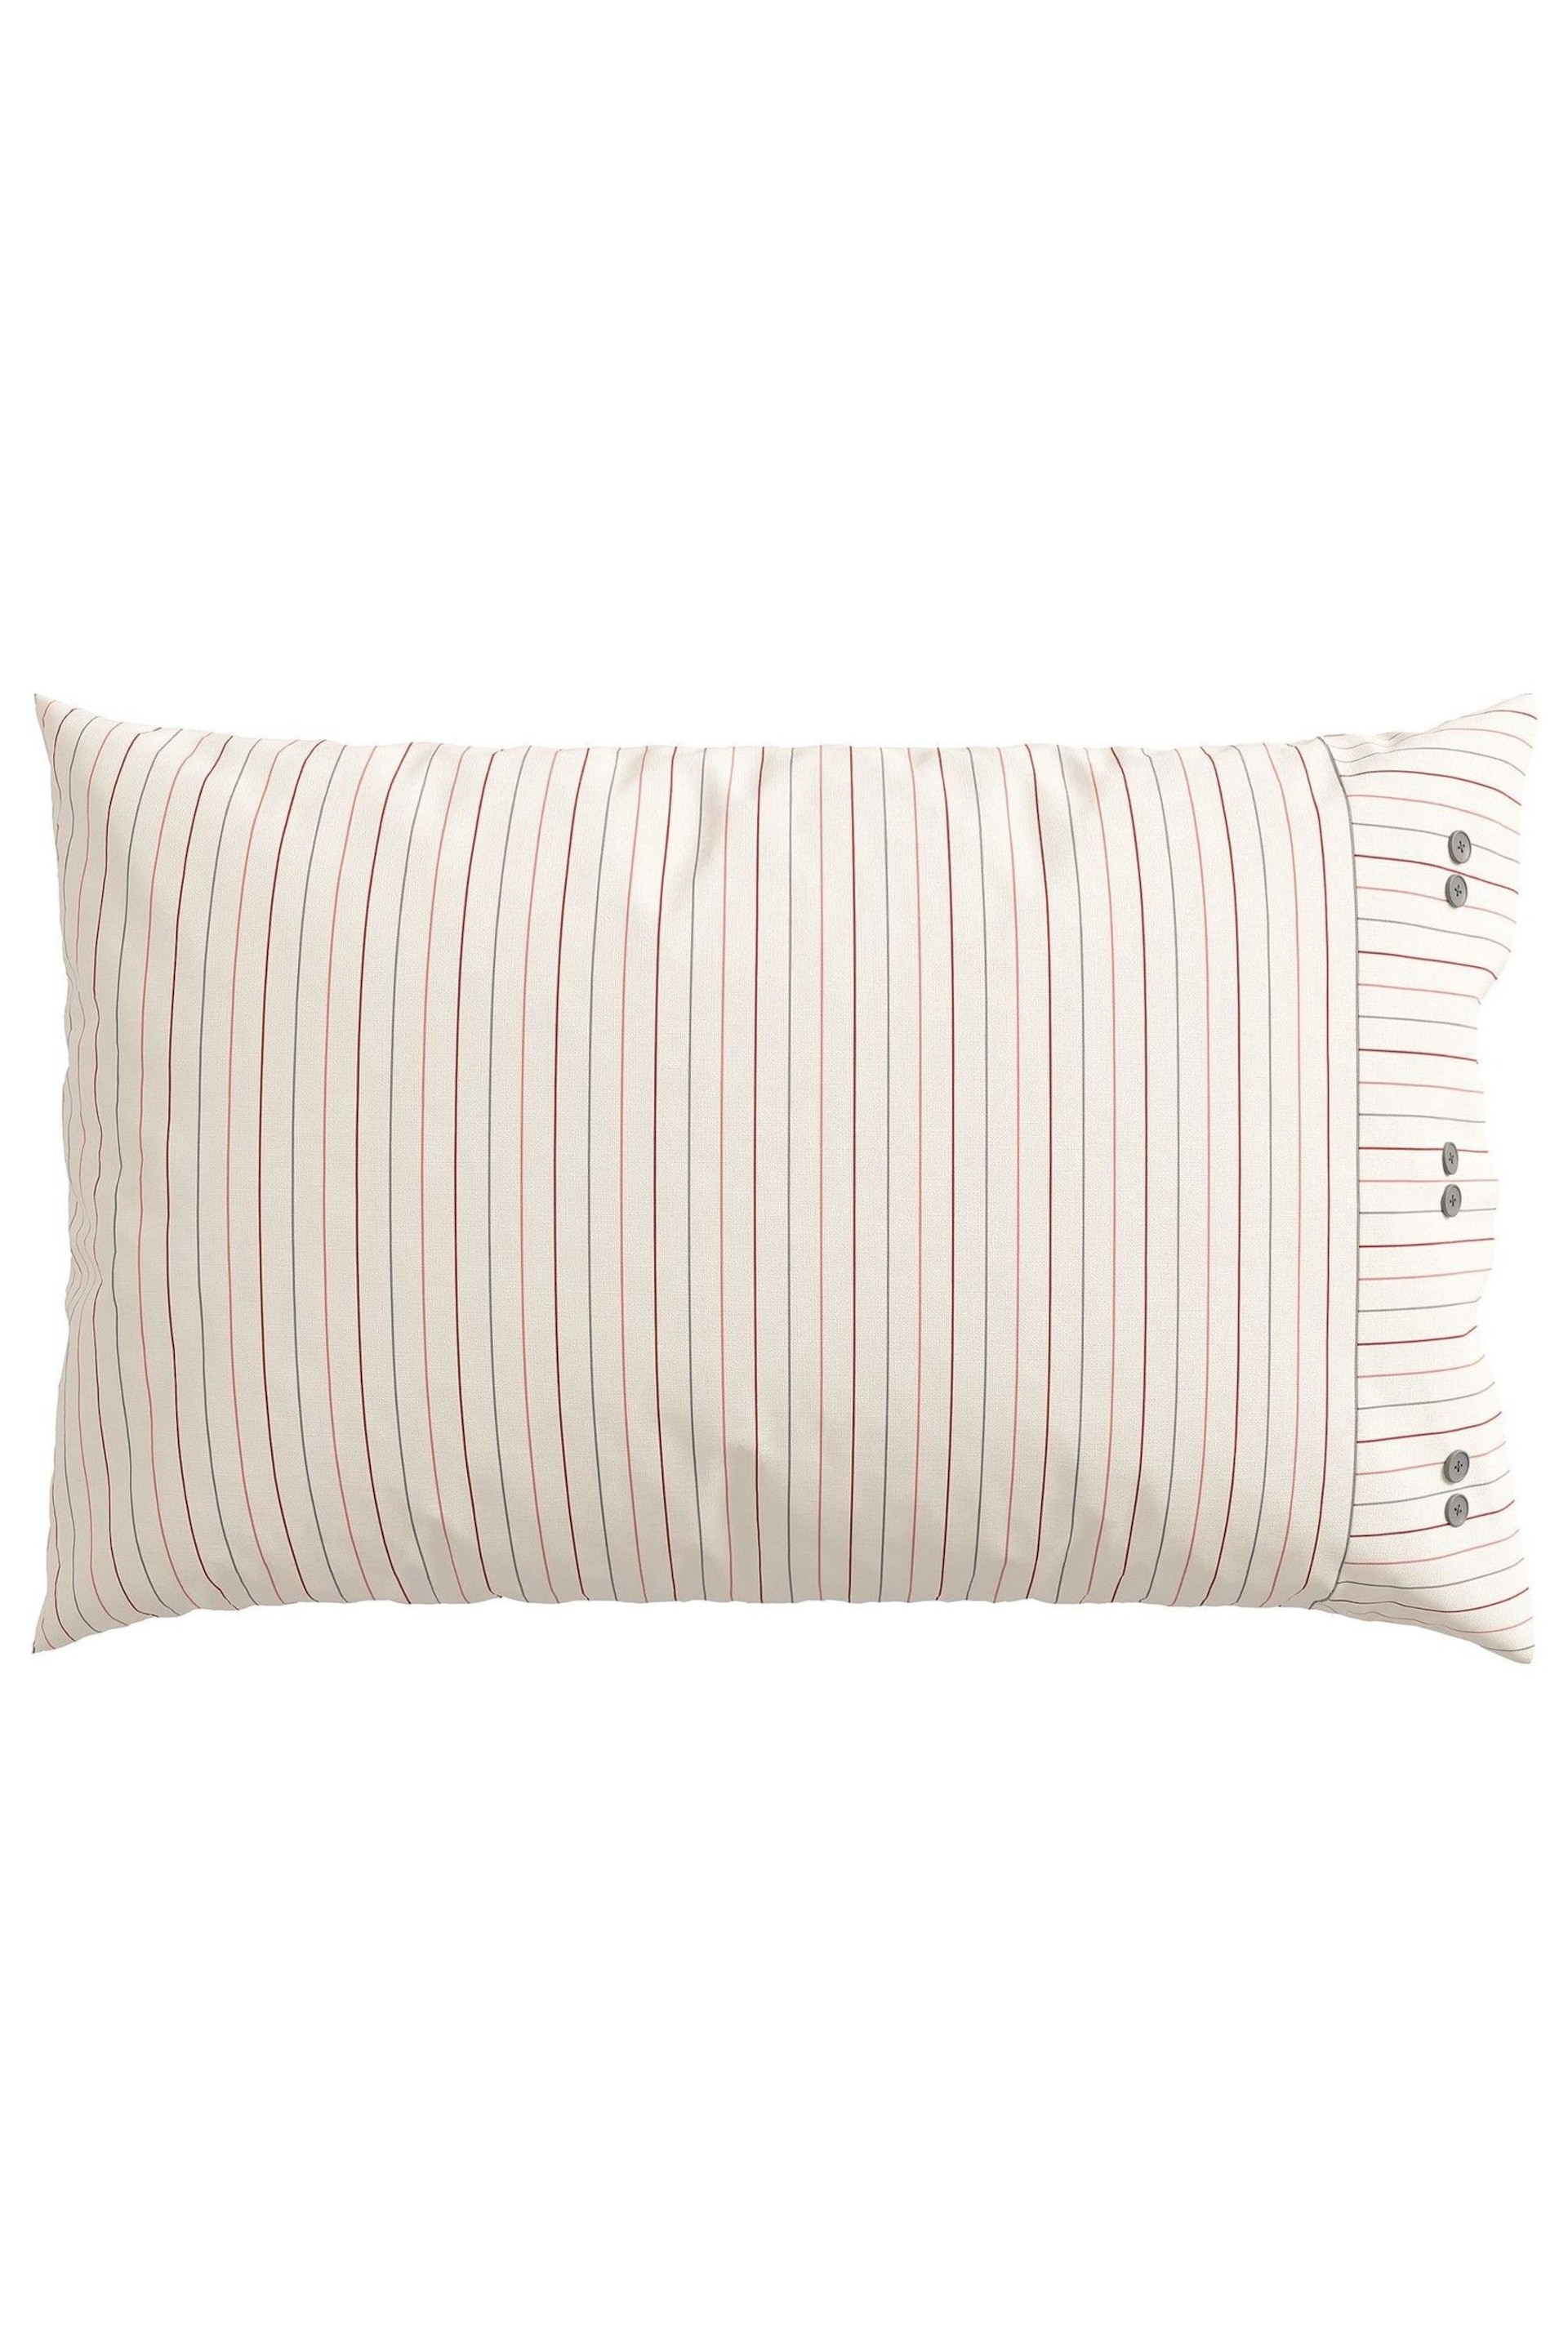 Bedeck of Belfast Coral Celina Pillowcase Pair - Image 4 of 4